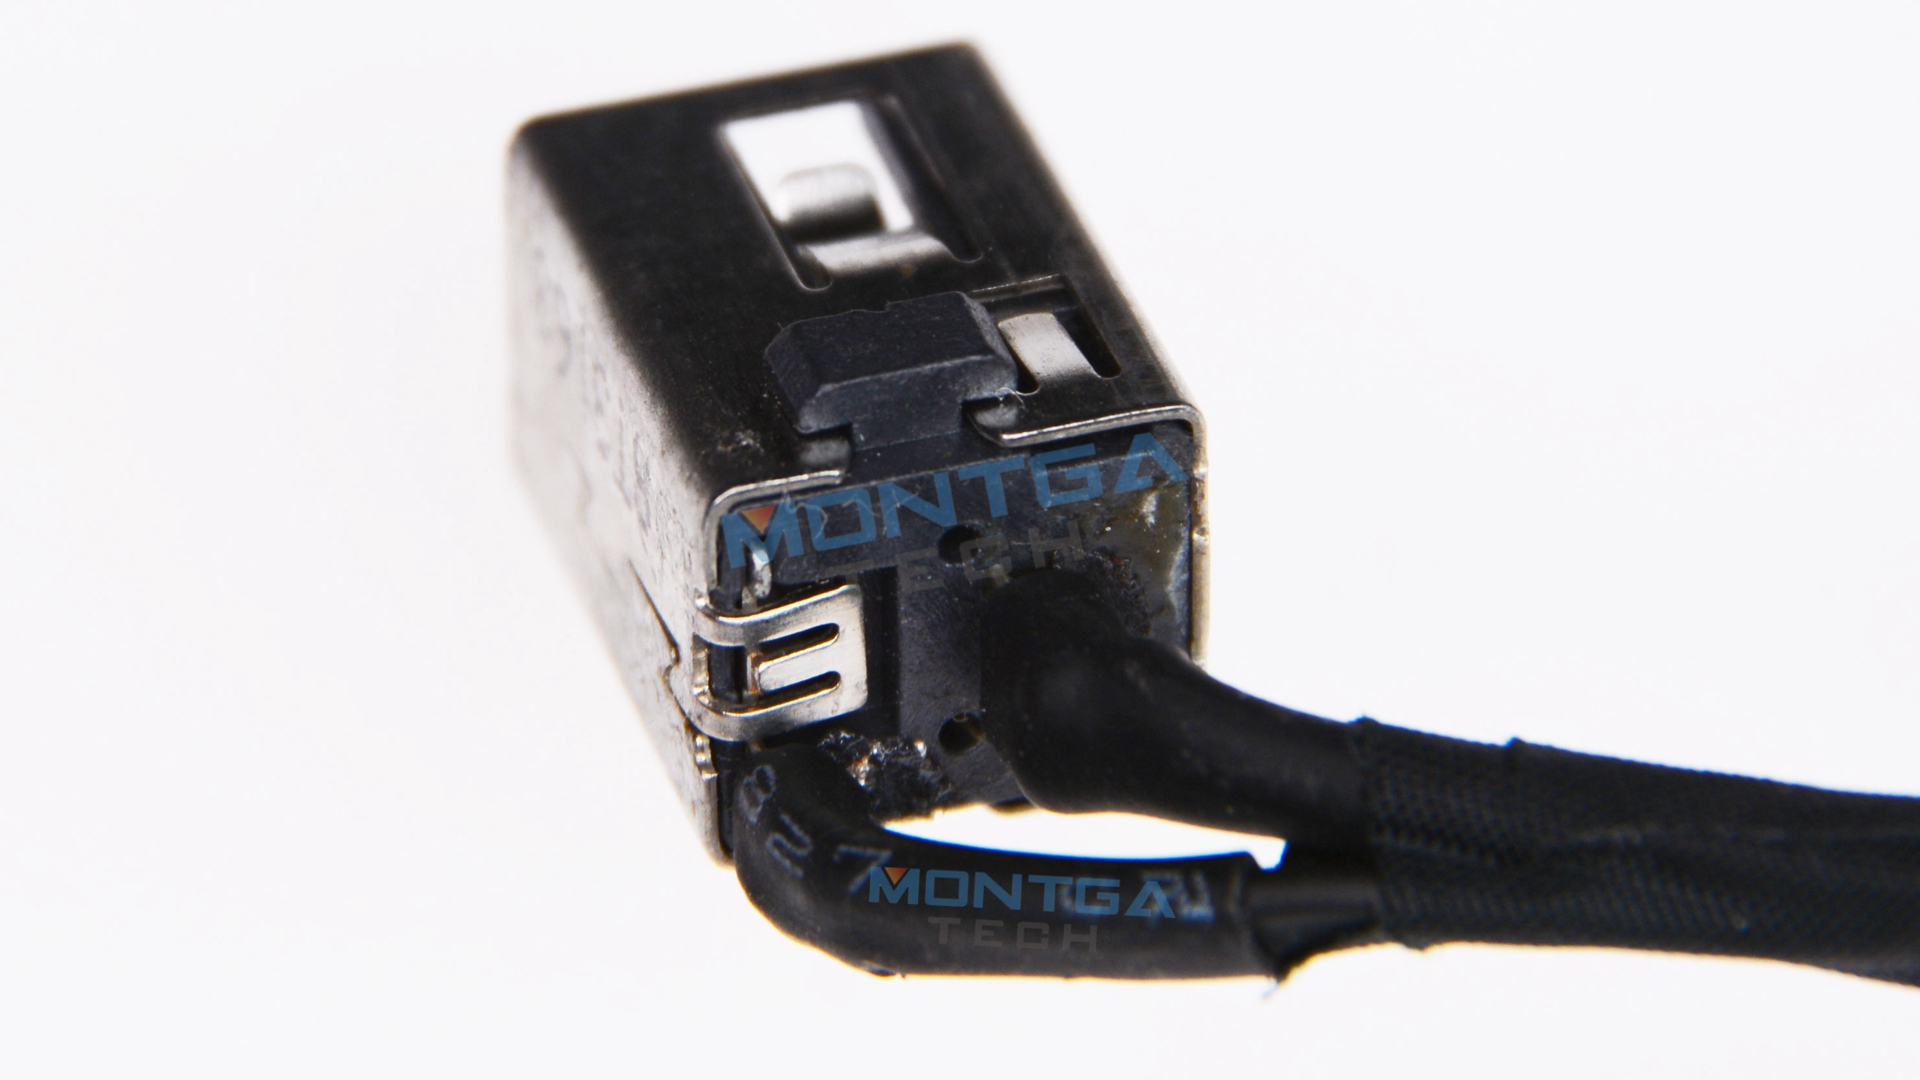 repair charging connector Toshiba C55DT-B, repair DC Power Jack Toshiba C55DT-B, repair DC IN Cable Toshiba C55DT-B, repair Jack socket Toshiba C55DT-B, repair plug Toshiba C55DT-B, repair DC Alimantation Toshiba C55DT-B, replace charging connector Toshiba C55DT-B, replace DC Power Jack Toshiba C55DT-B, replace DC IN Cable Toshiba C55DT-B, replace Jack socket Toshiba C55DT-B, replace plug Toshiba C55DT-B, replace DC Alimantation Toshiba C55DT-B,